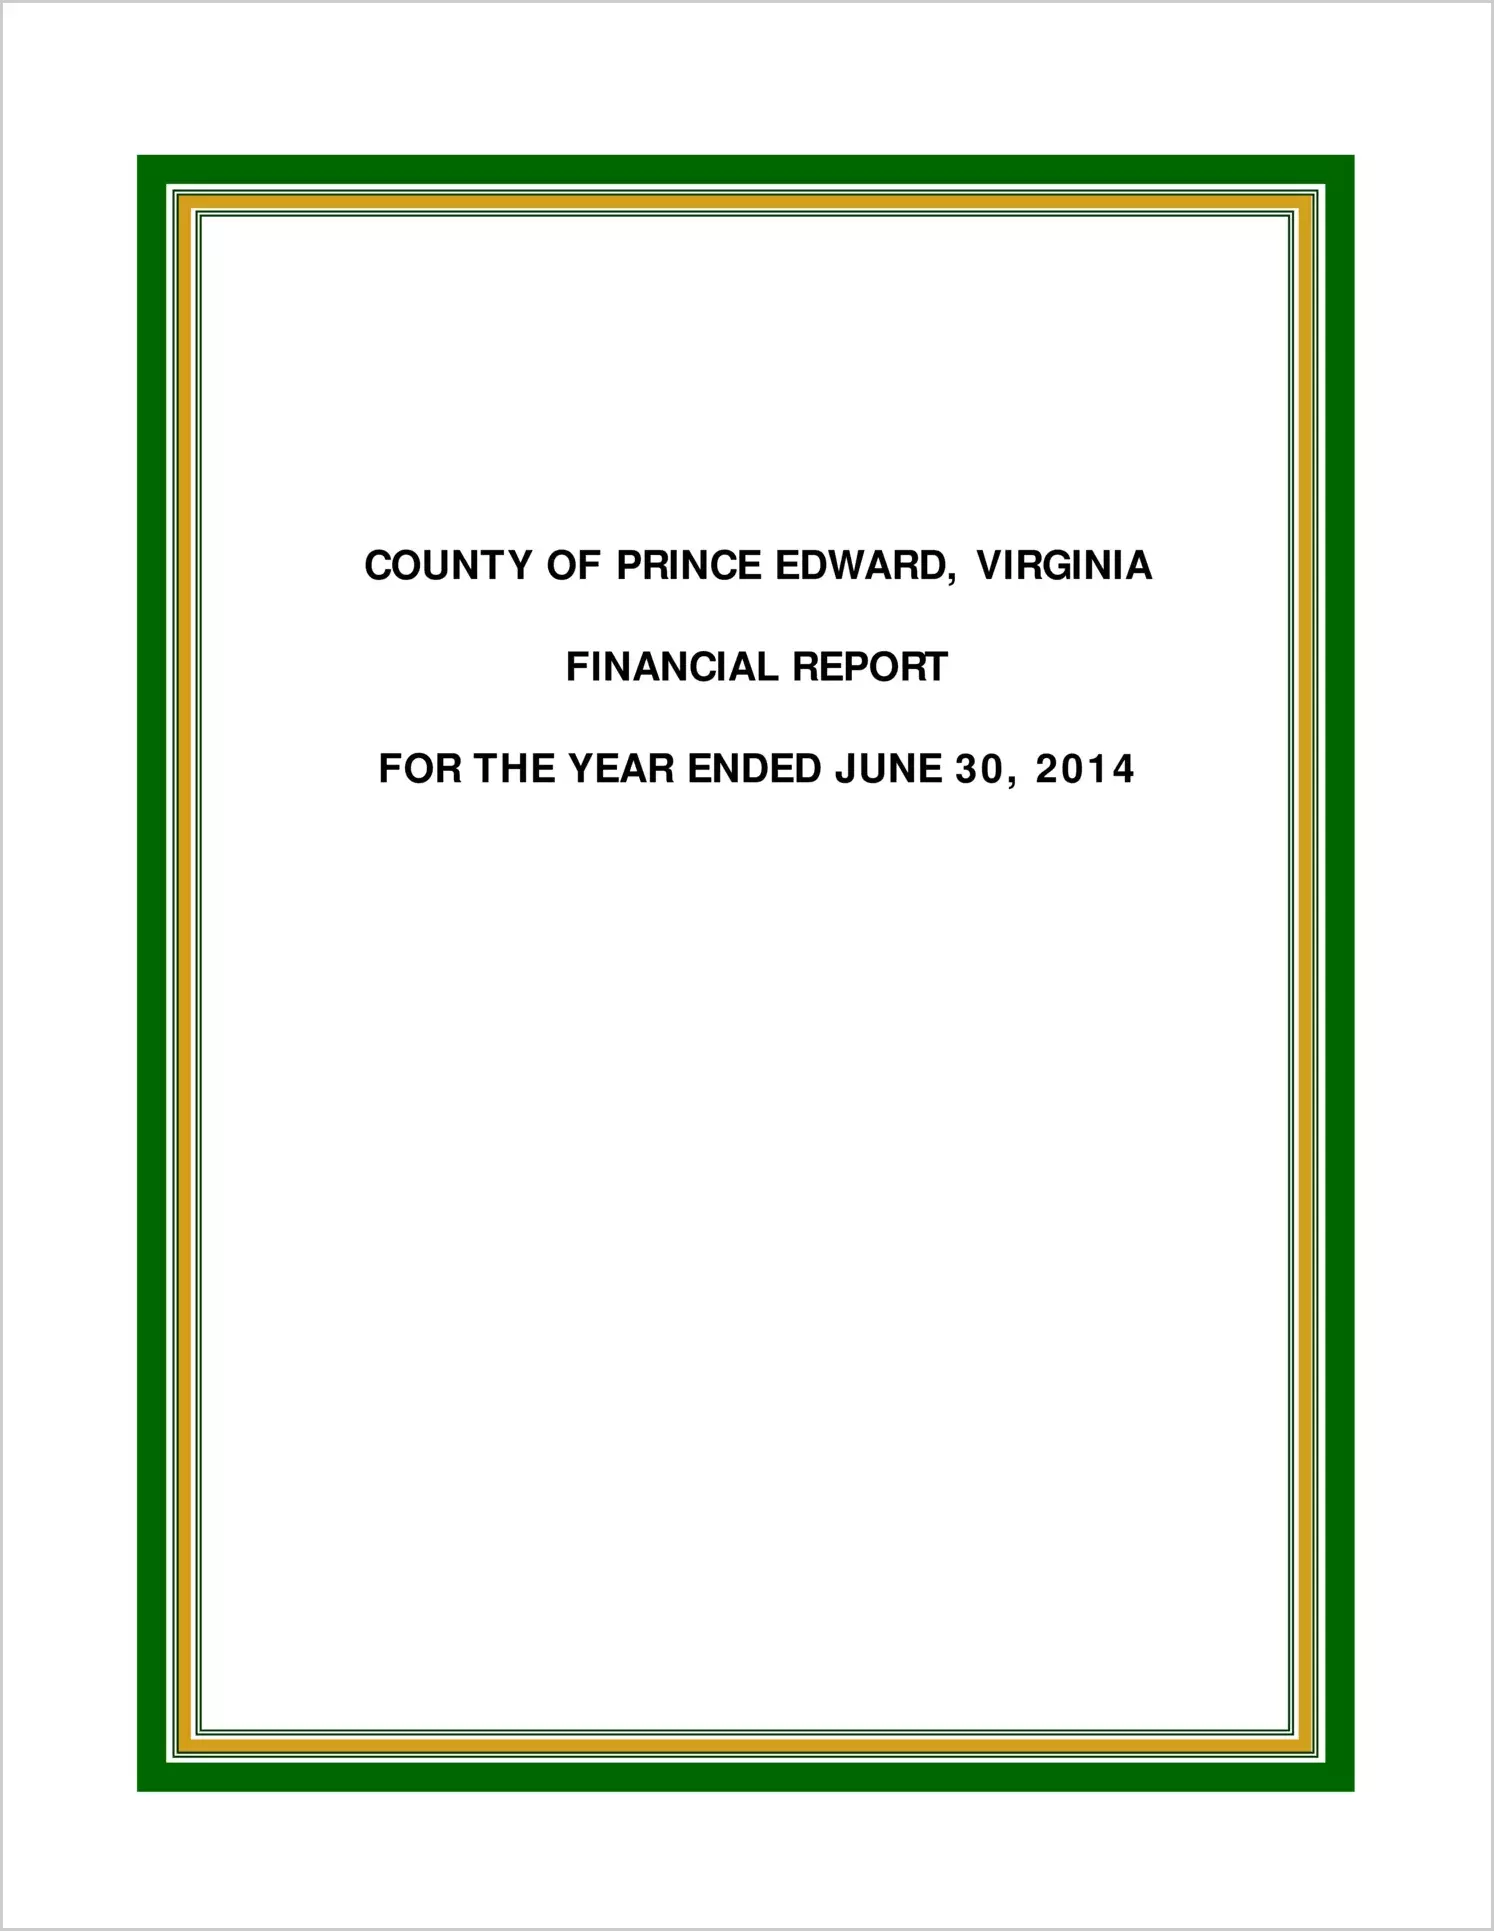 2014 Annual Financial Report for County of Prince Edward